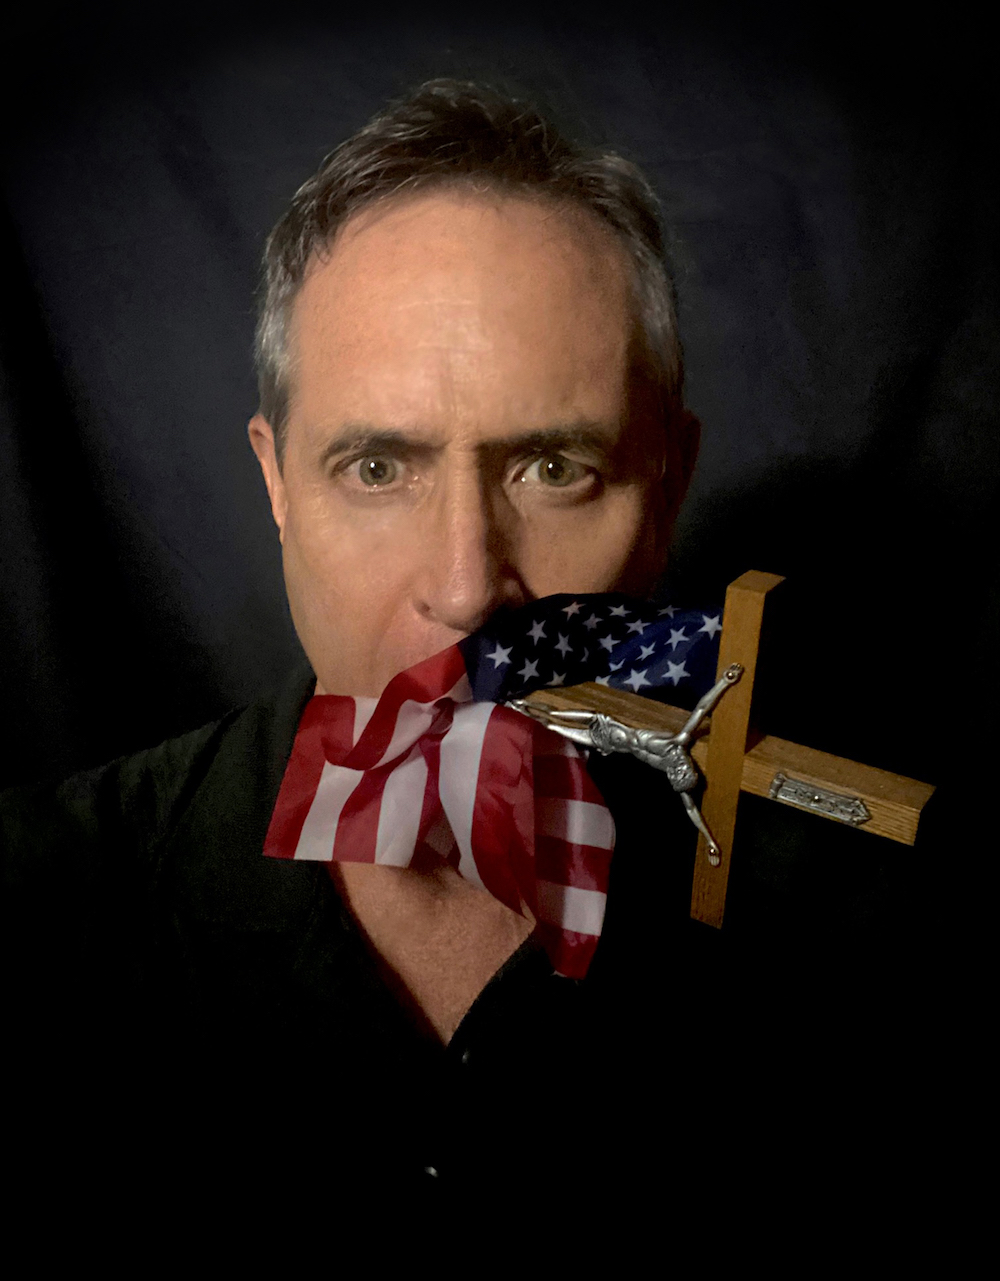 "Shoved down our throats" is a self portrait of the author with an American flag and crucifix in his mouth